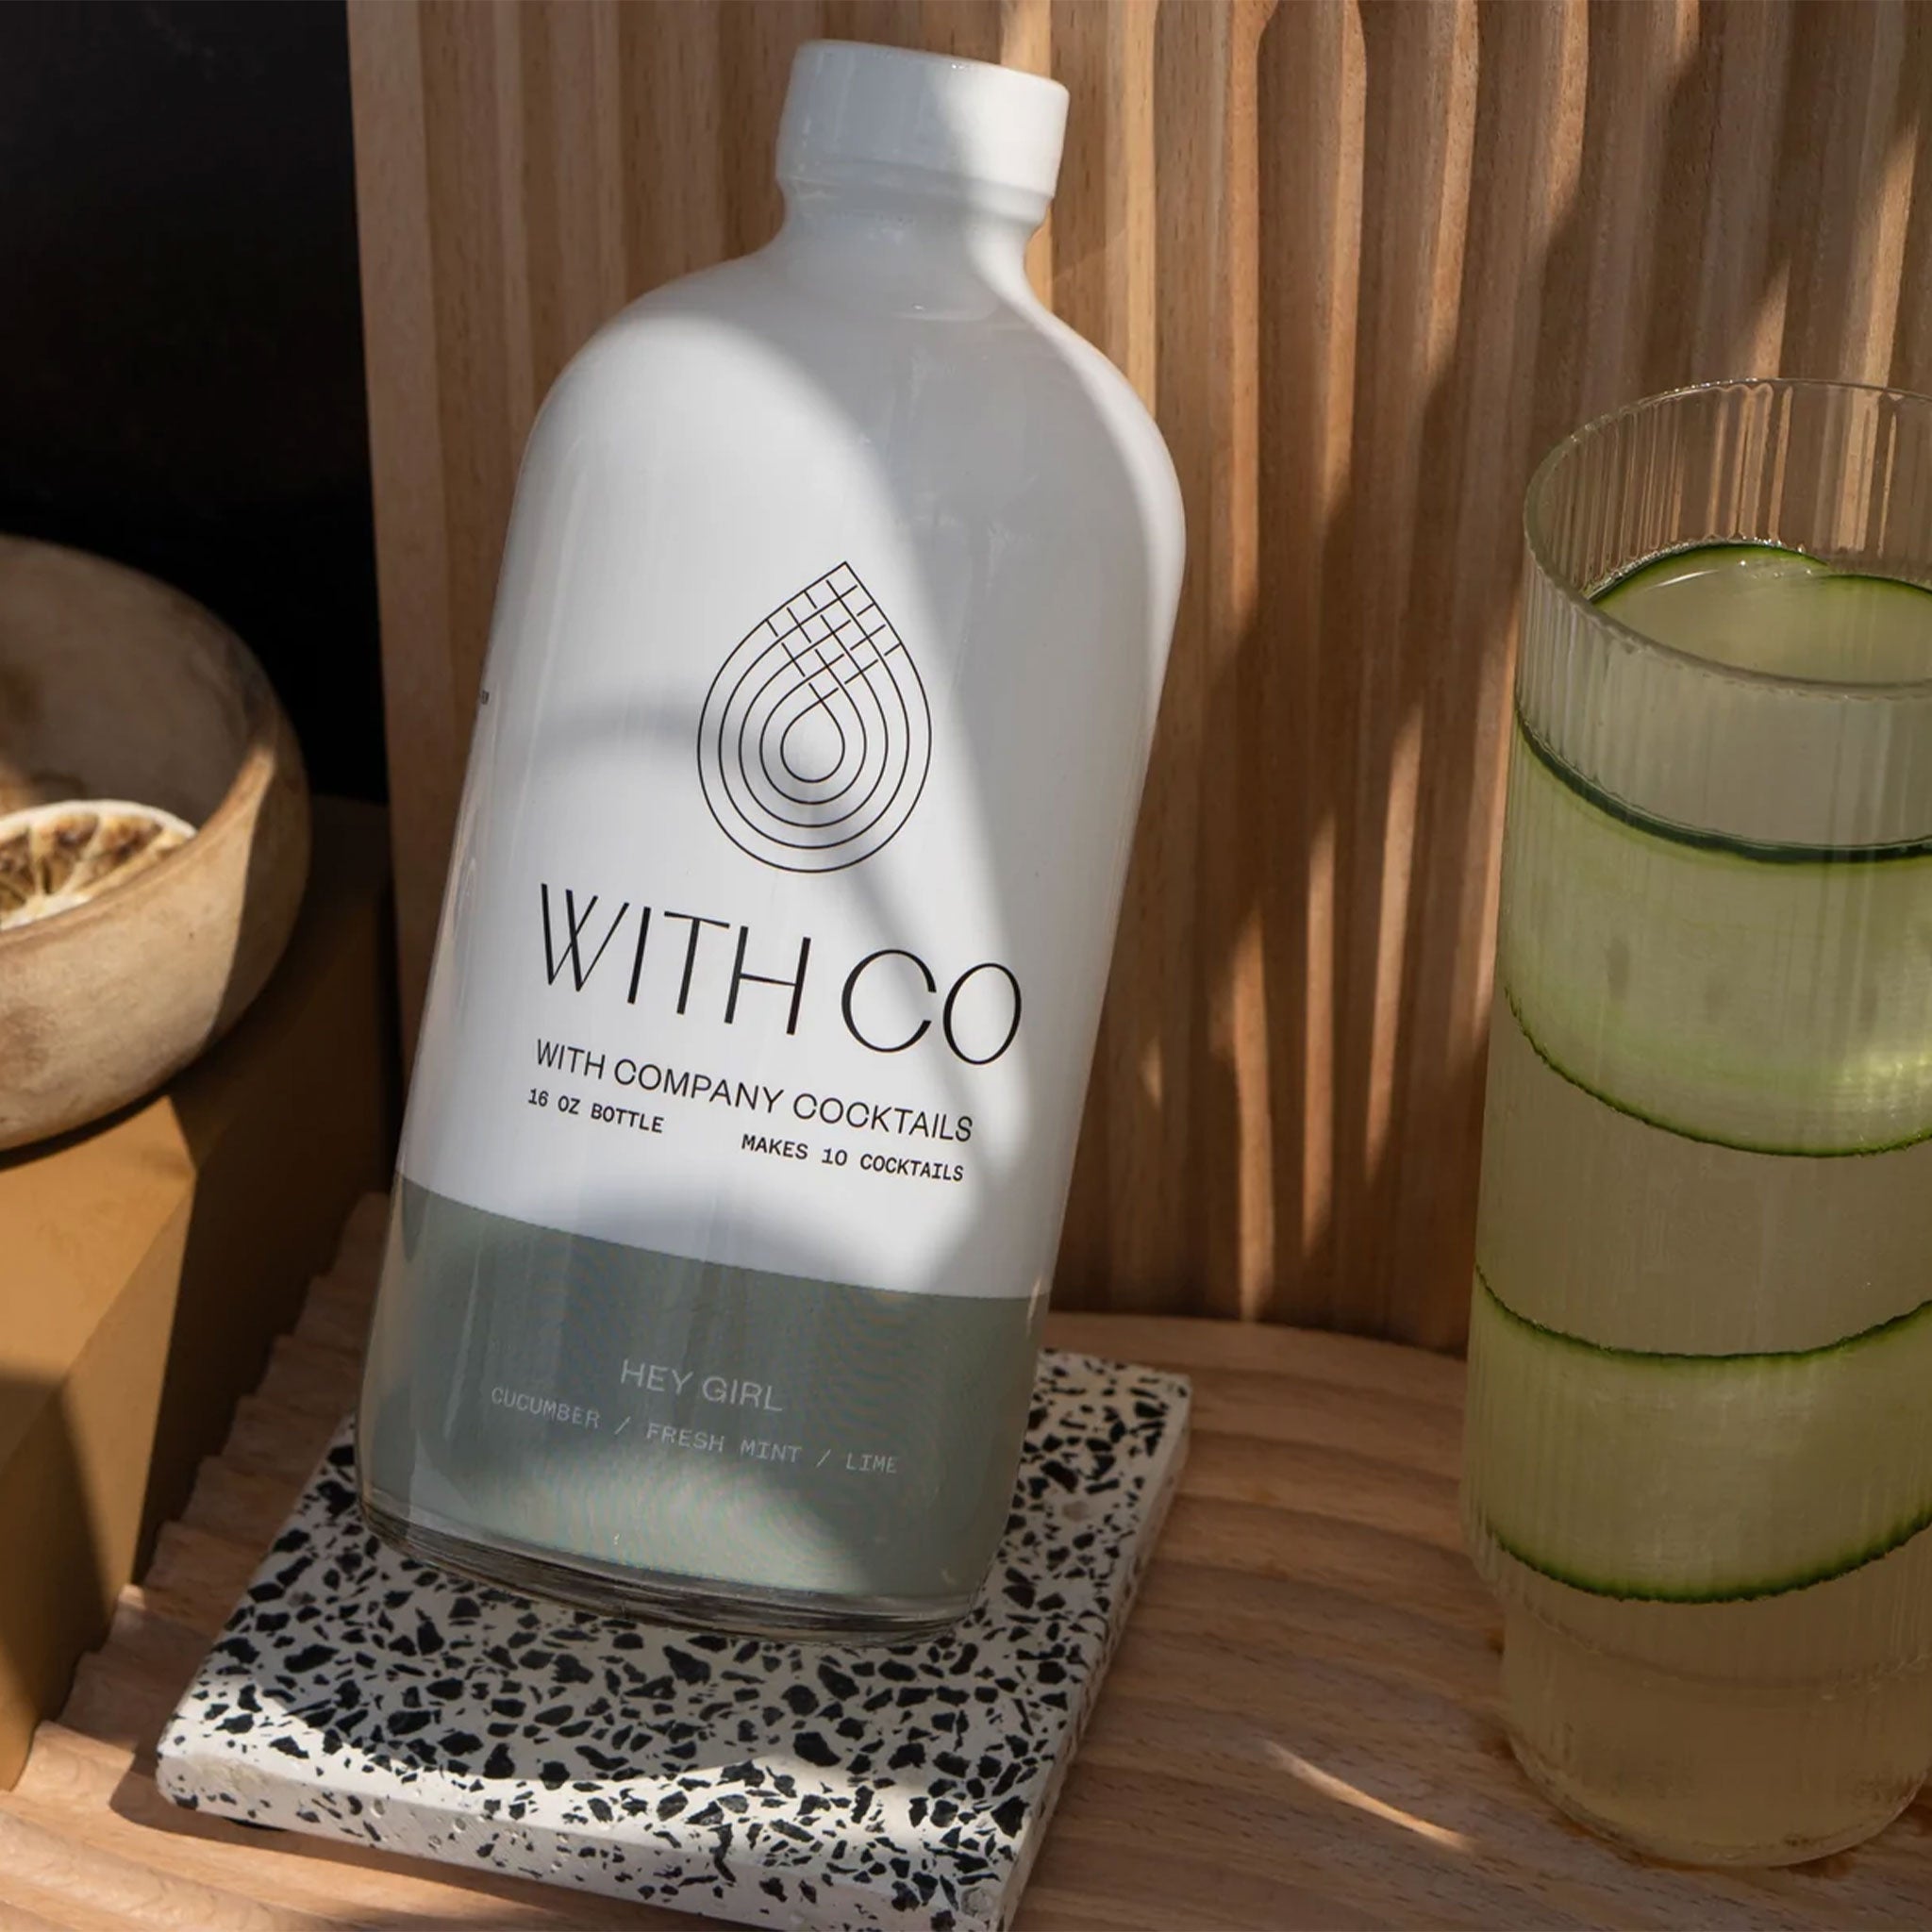 A white container with a sage green bottom half along with the brand &quot;With Co&quot; written in black text along with the name of the cocktail mix &quot;Hey Girl&quot; in white text on the green background.